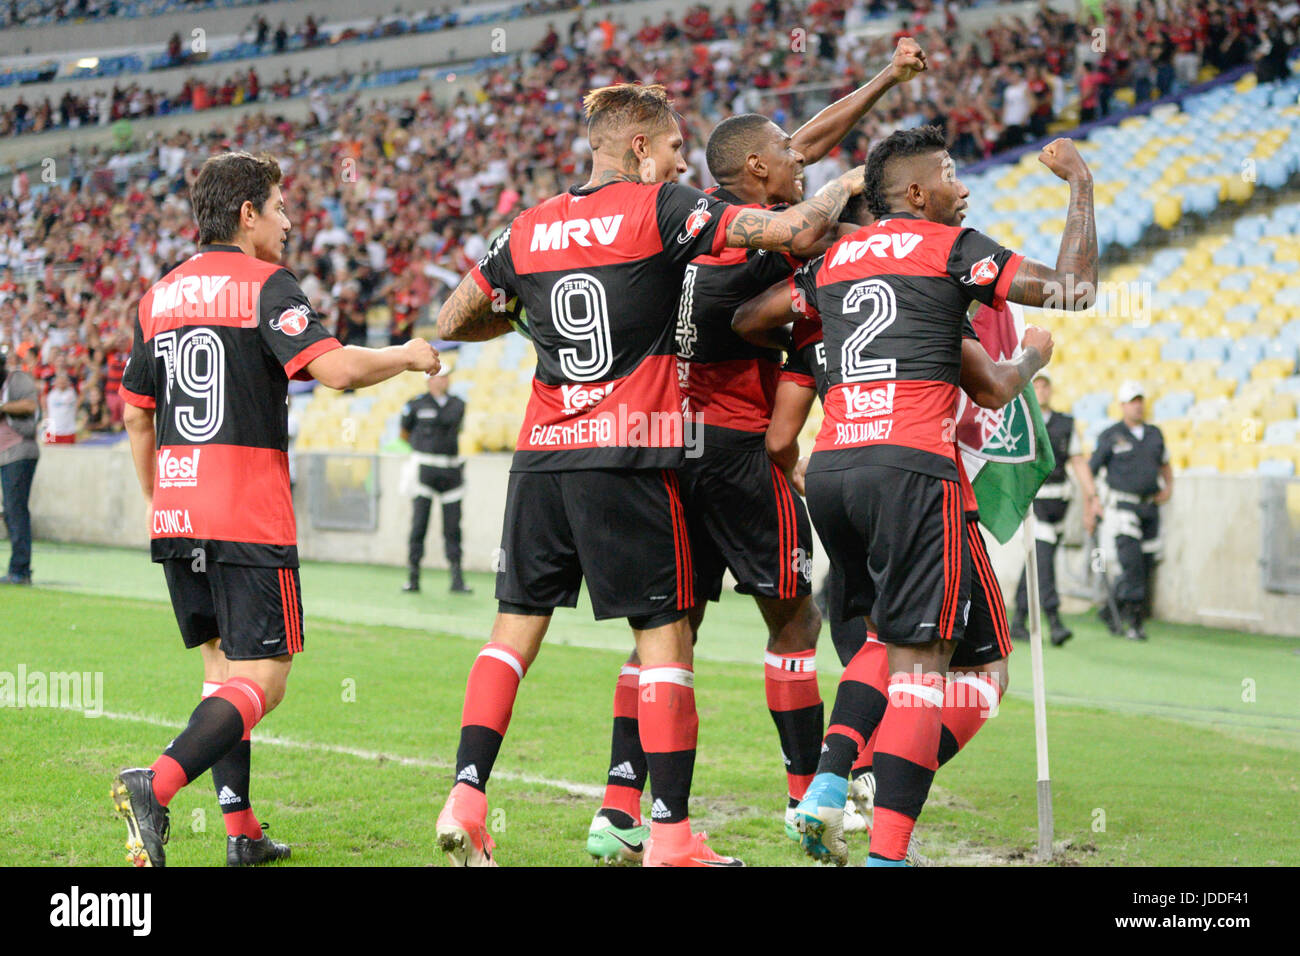 Trauco, Flamengo player celebrates goal during match against Fluminense in a game valid for the eighth round of the Brazilian Campenato at the Maracanã stadium in Rio de Janeiro, on Sunday, 18. (PHOTO: CLEVER FELIX/BRAZIL PHOTO PRESS) Stock Photo